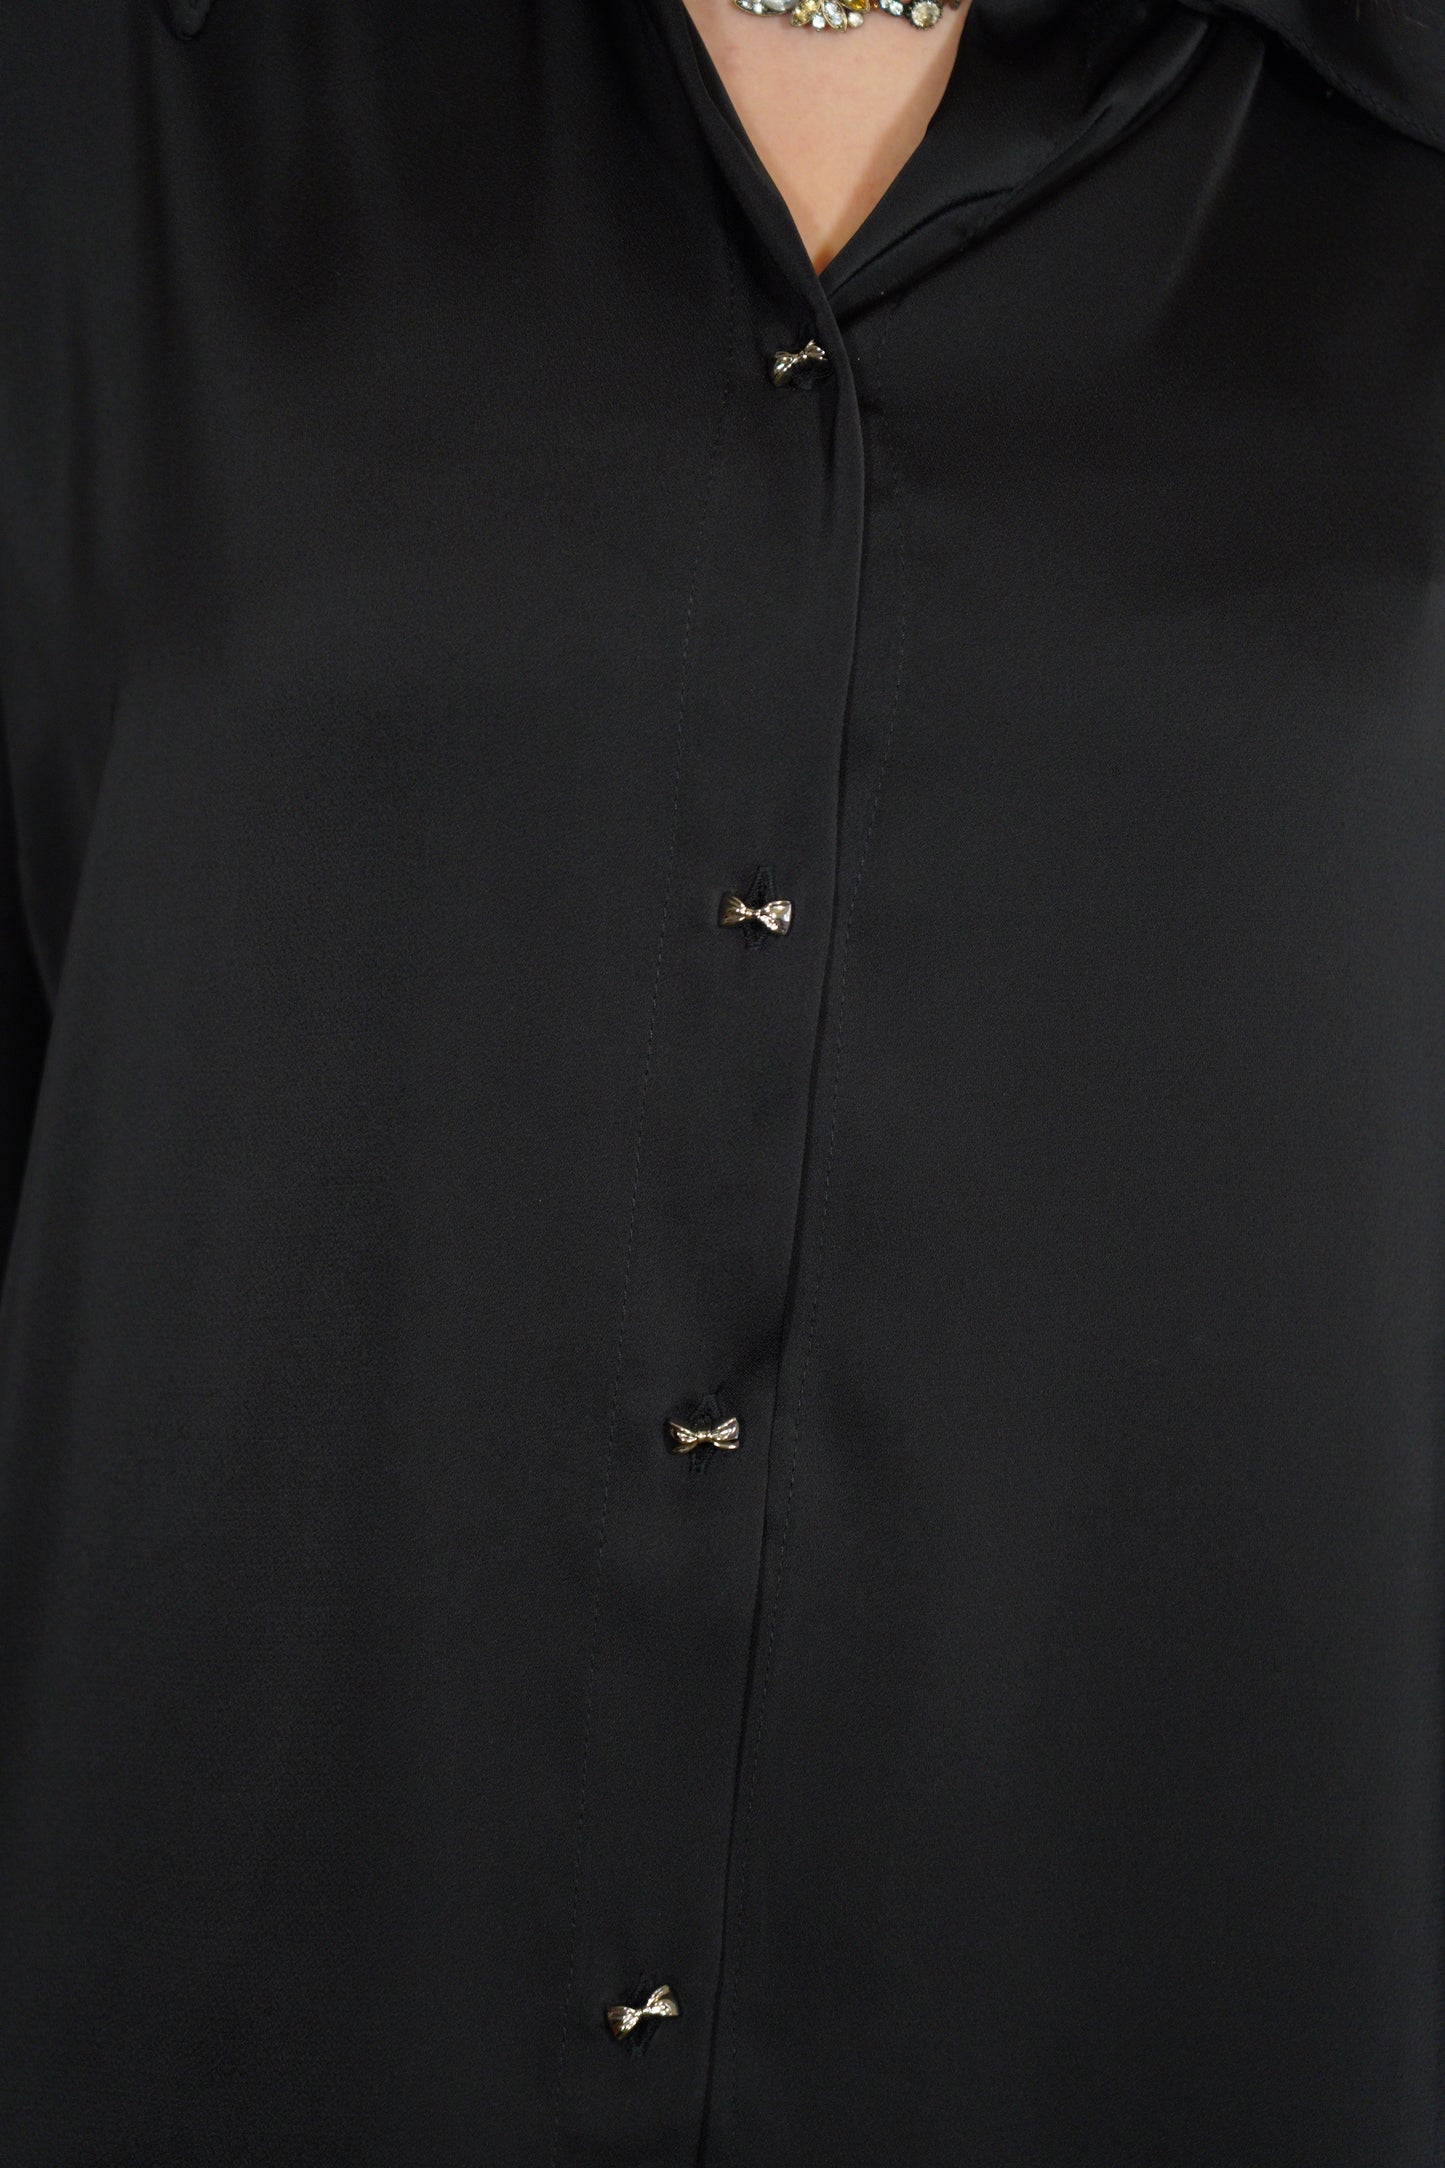 The Satin Button-up in Black